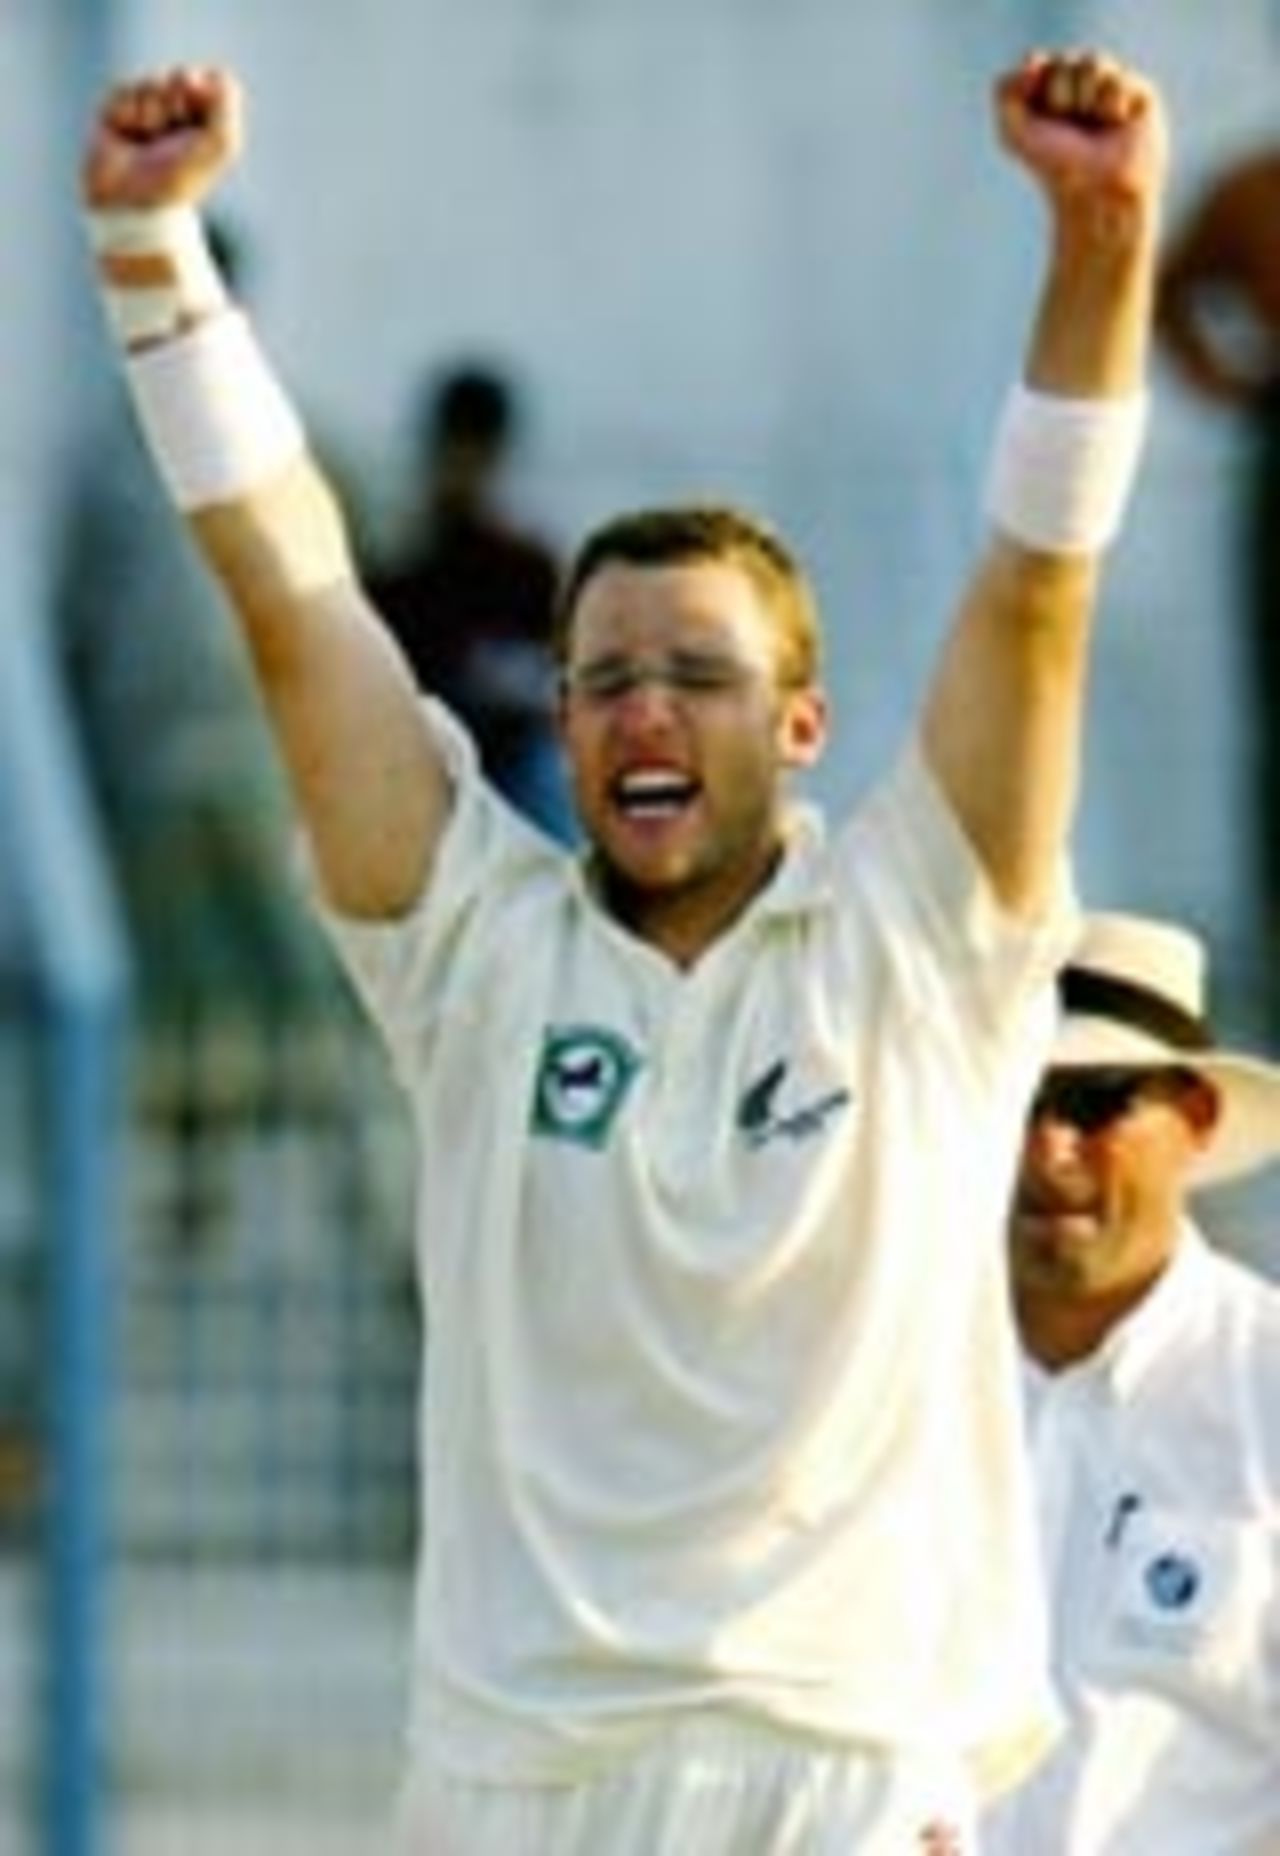 Daniel Vettori with both arms raised after taking a wicket, Bangladesh v New Zealand, 2nd Test, 4th day, Chittagong, October 29, 2004